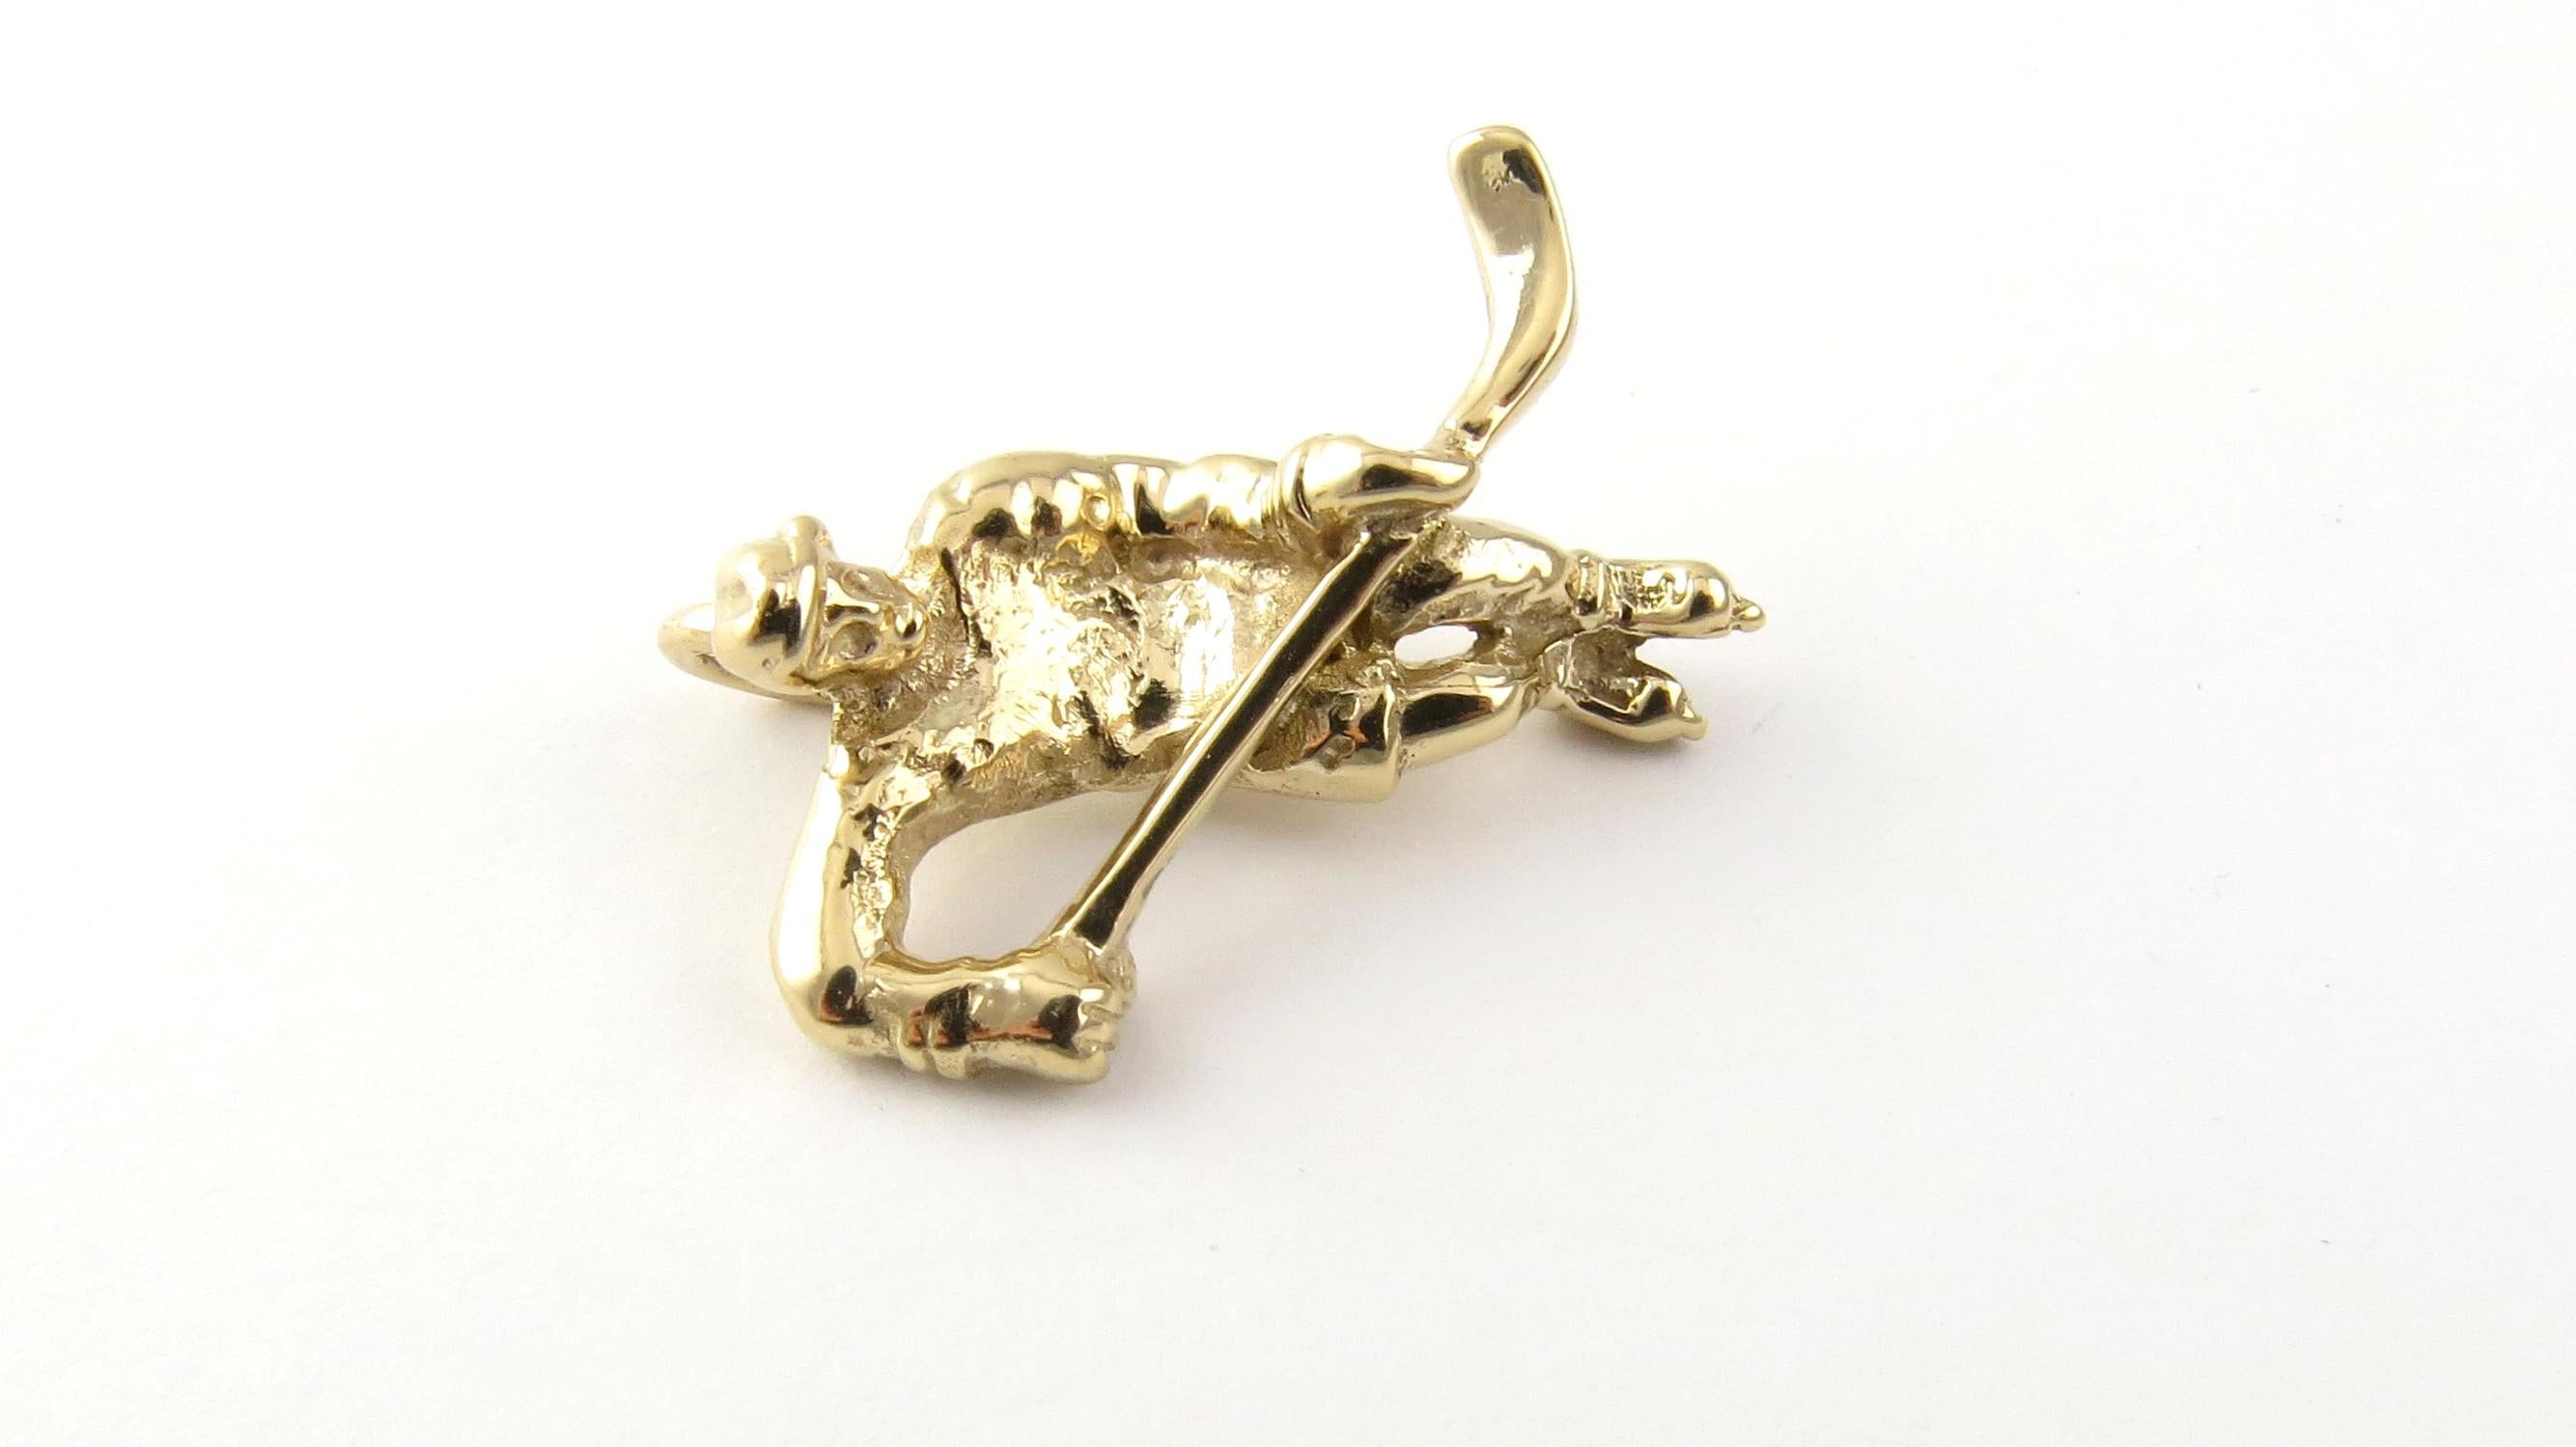 Vintage 14 Karat Yellow Gold Ice Hockey Charm

Perfect gift for the hockey player!

This lovely 3D charm features a miniature ice hockey player in action meticulously detailed in 14K yellow gold.

Size: 27 mm x 20 mm

Weight: 4.4 dwt. / 6.9